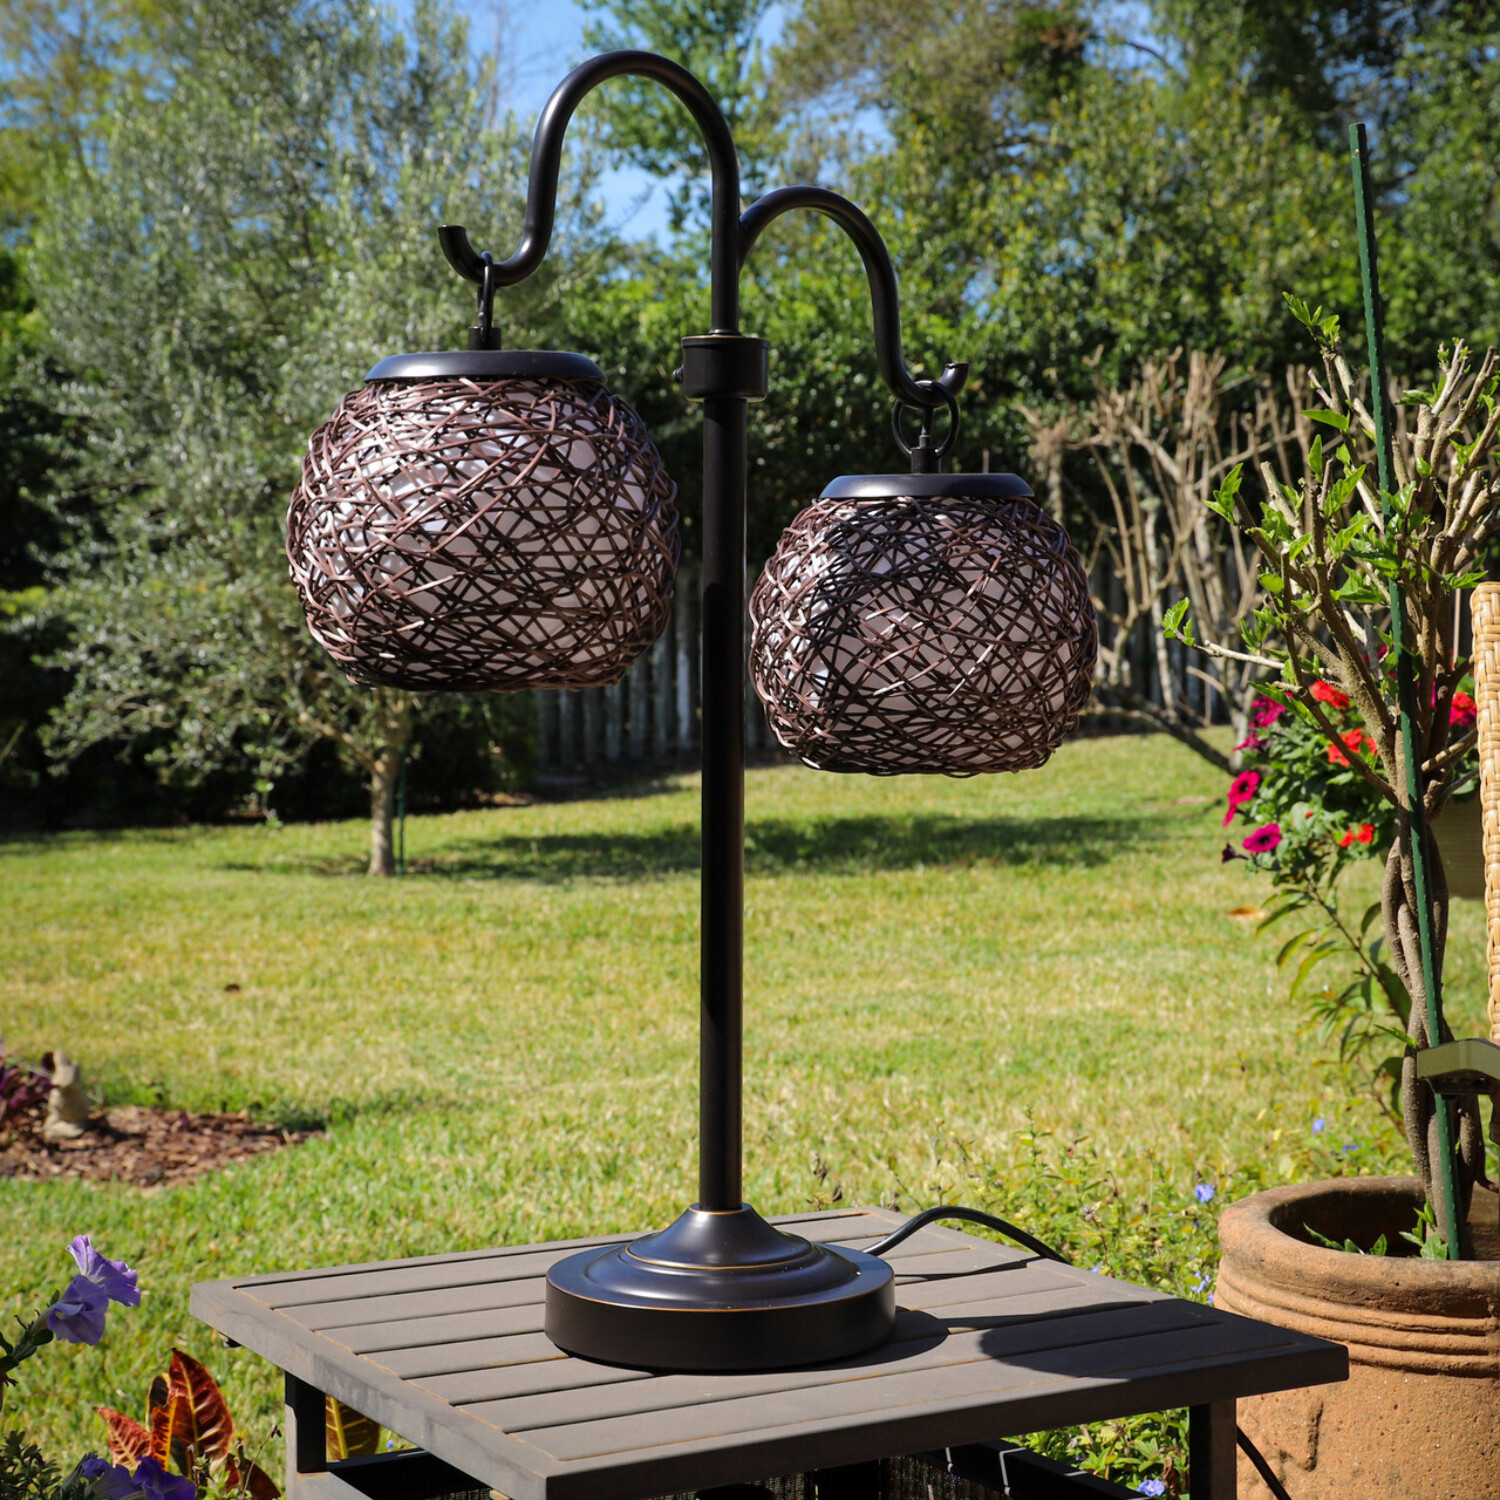 Kenroy Home Mediterranean-Inspired Outdoor Table Lamp, 29 Inch Height, Oil Rubbed Bronze Finish, Cream Acrylic Inner Shade with Rattan Entwined Outer Shades, 4 Way Adjustable Lighting, Pole Switch - image 3 of 8